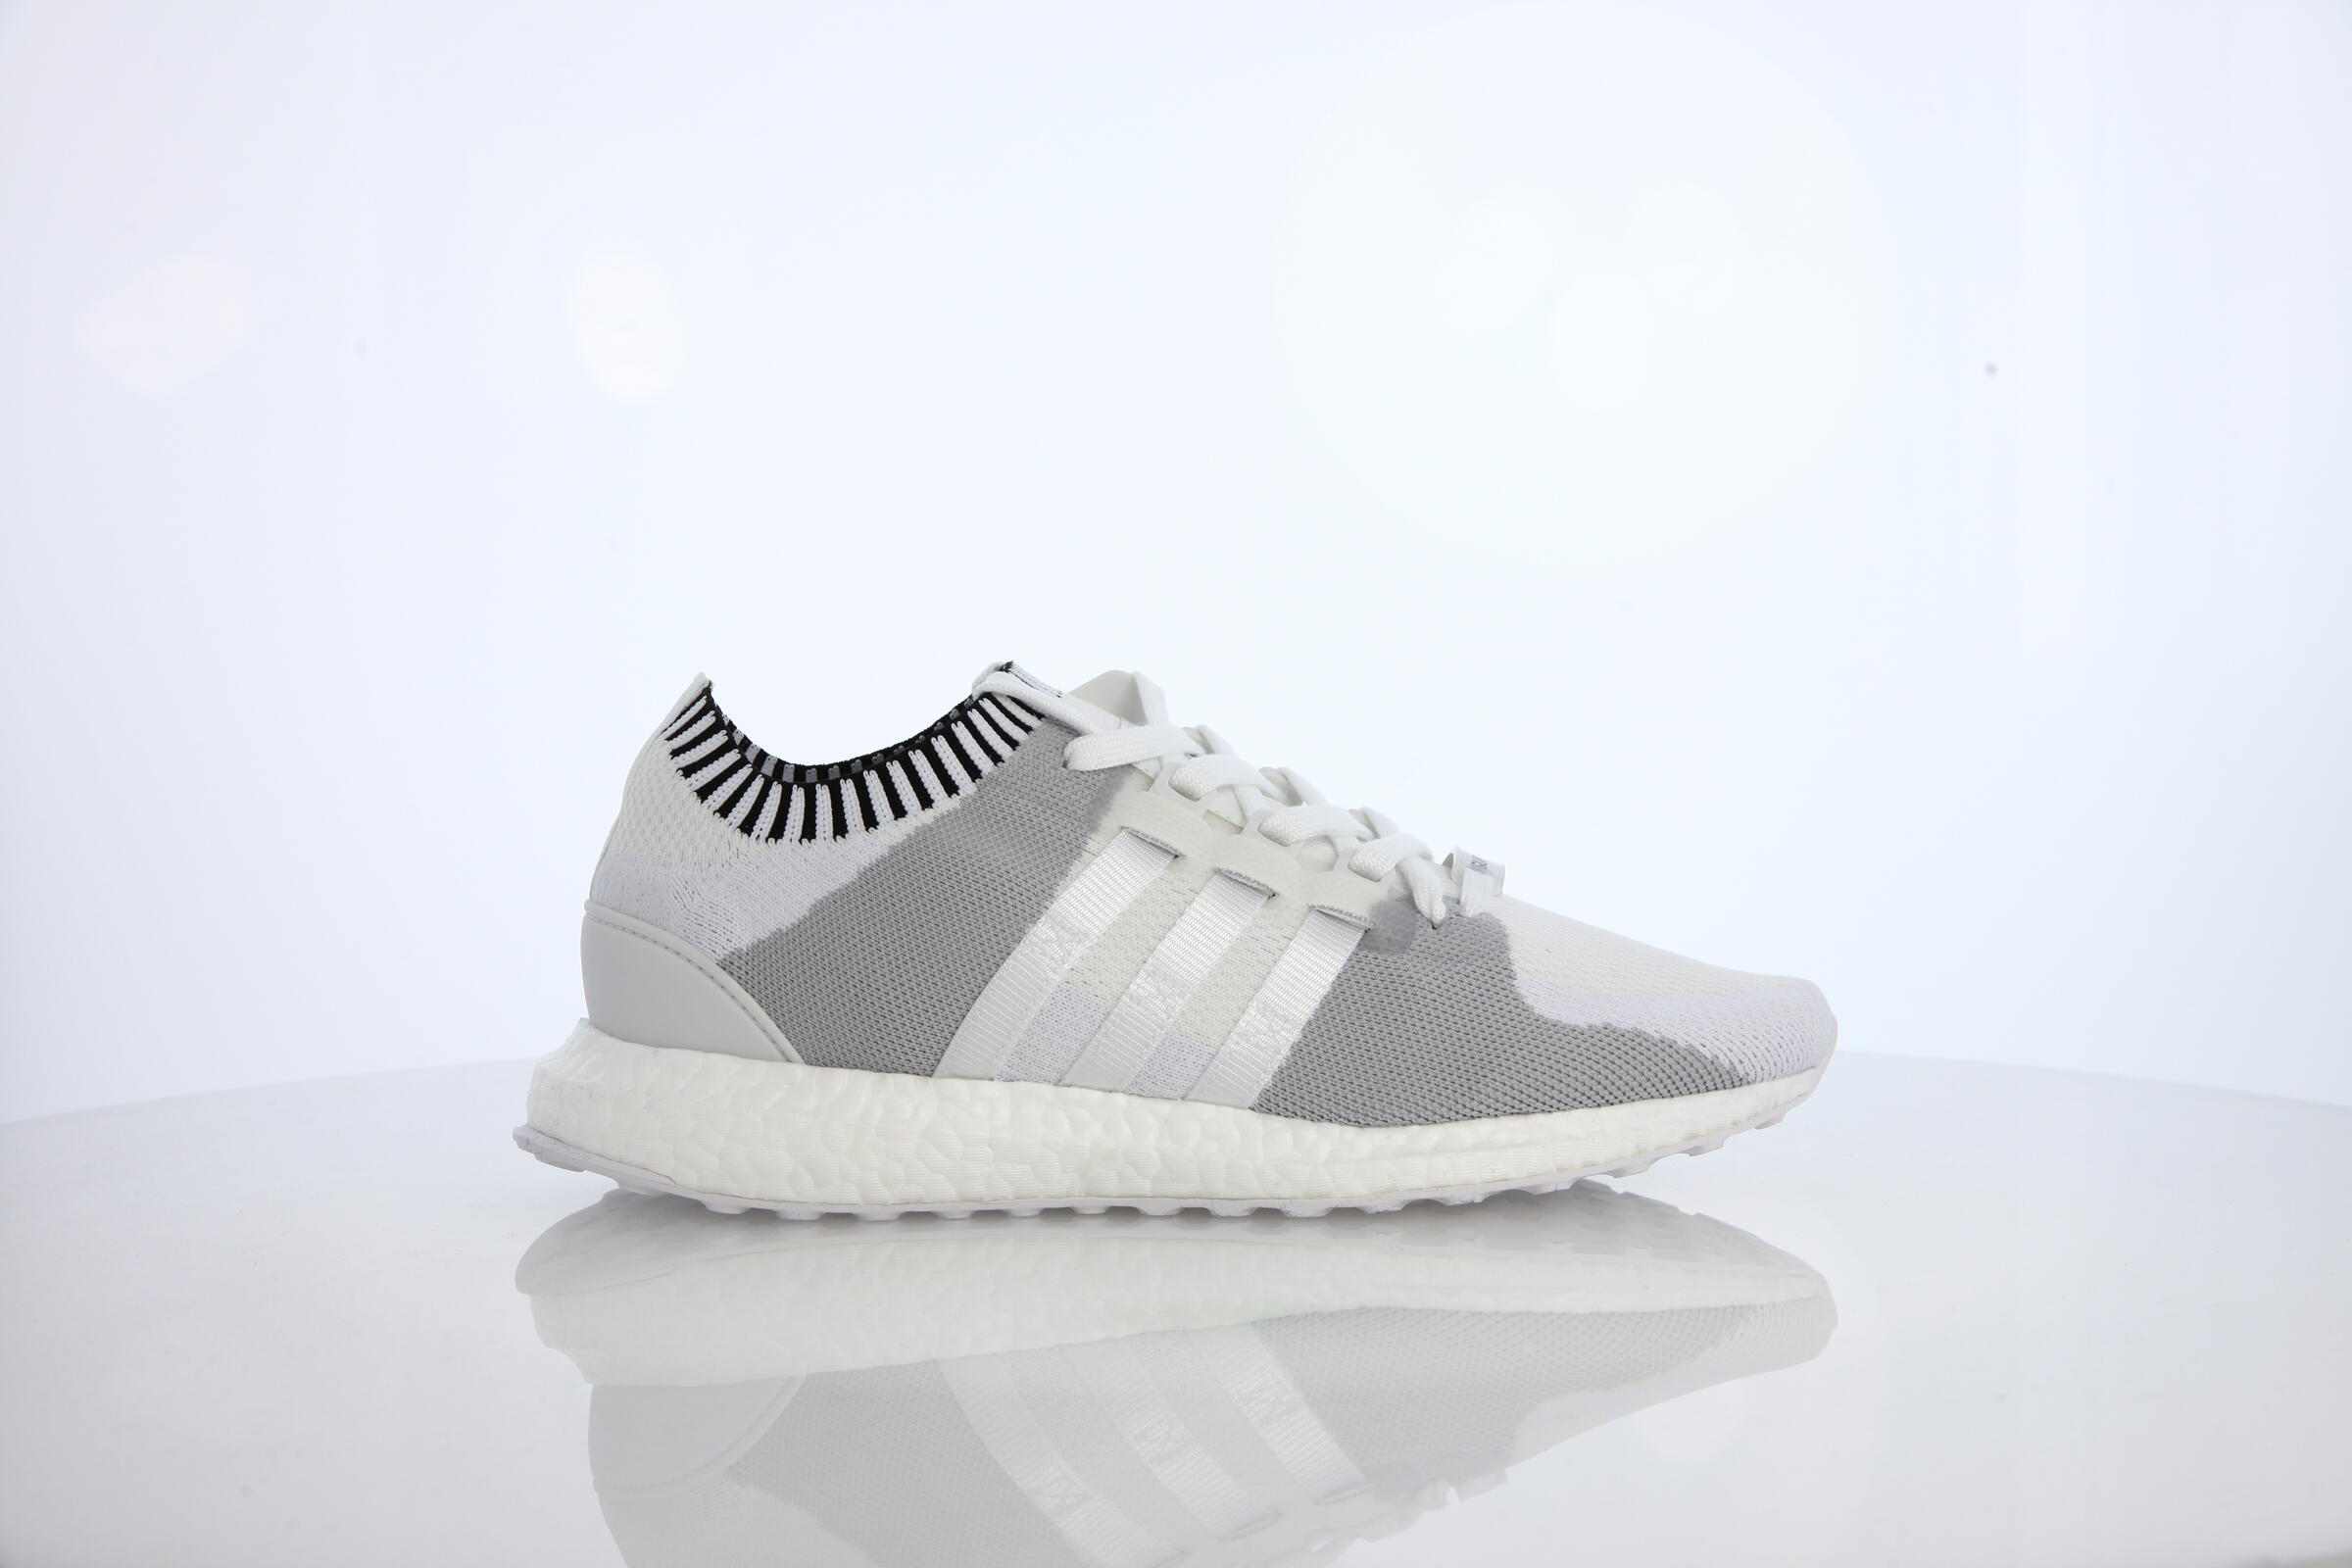 adidas Performance Equipment Support Ultra Prime "Vintage White"